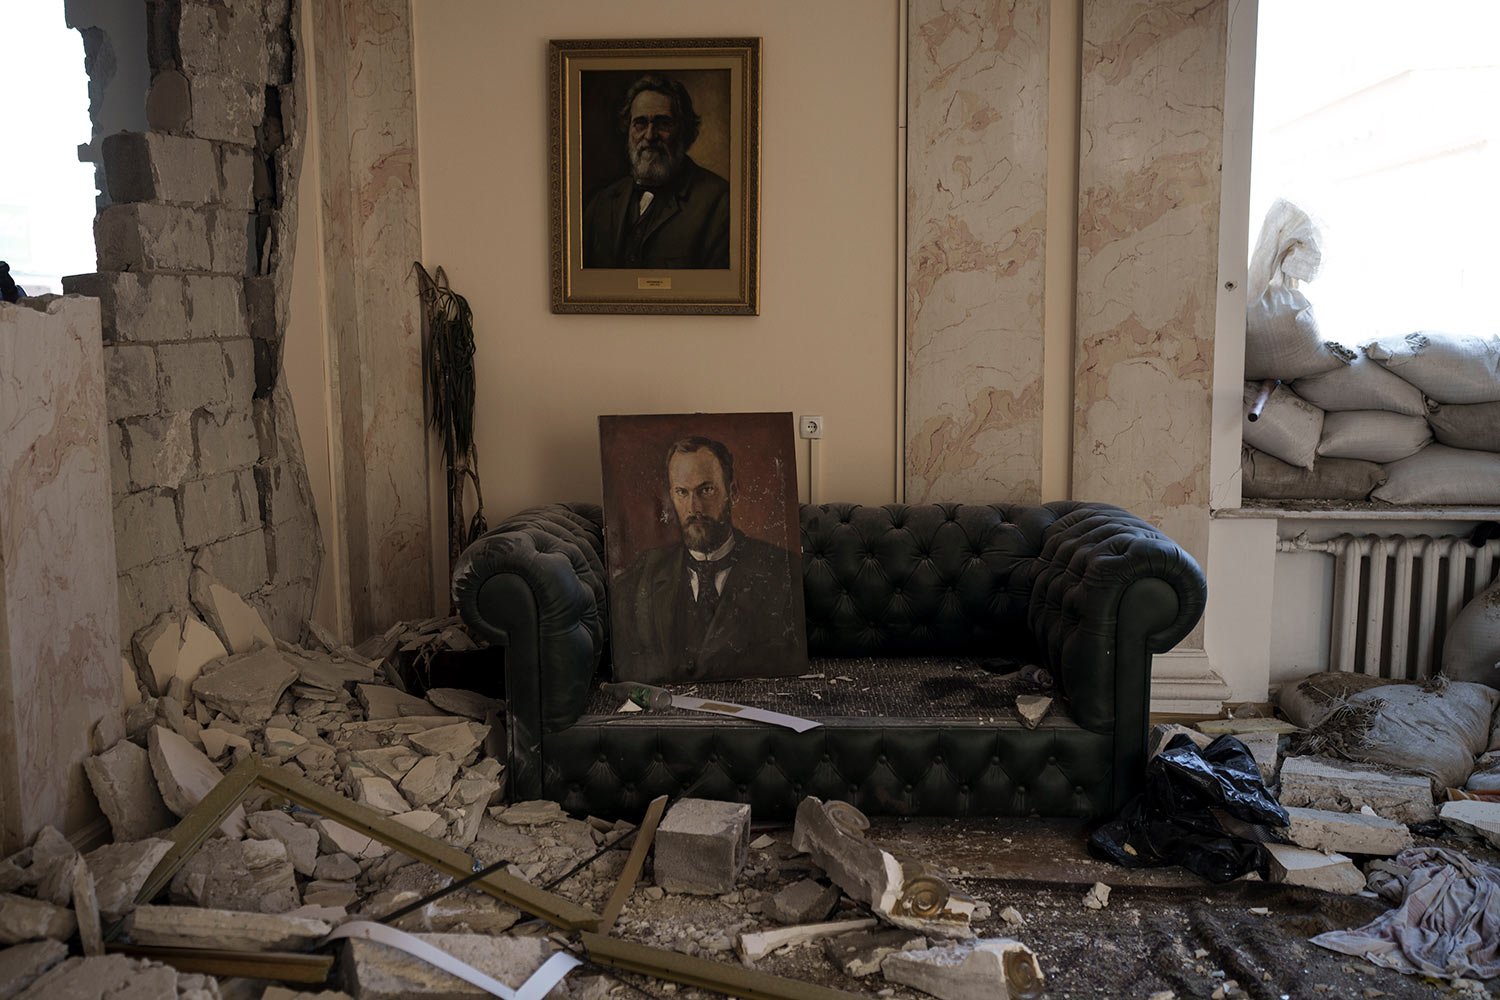  Inside view of the regional administration building, heavily damaged after a Russian attack earlier this month in Kharkiv, Ukraine, Thursday, March 24, 2022. (AP Photo/Felipe Dana) 